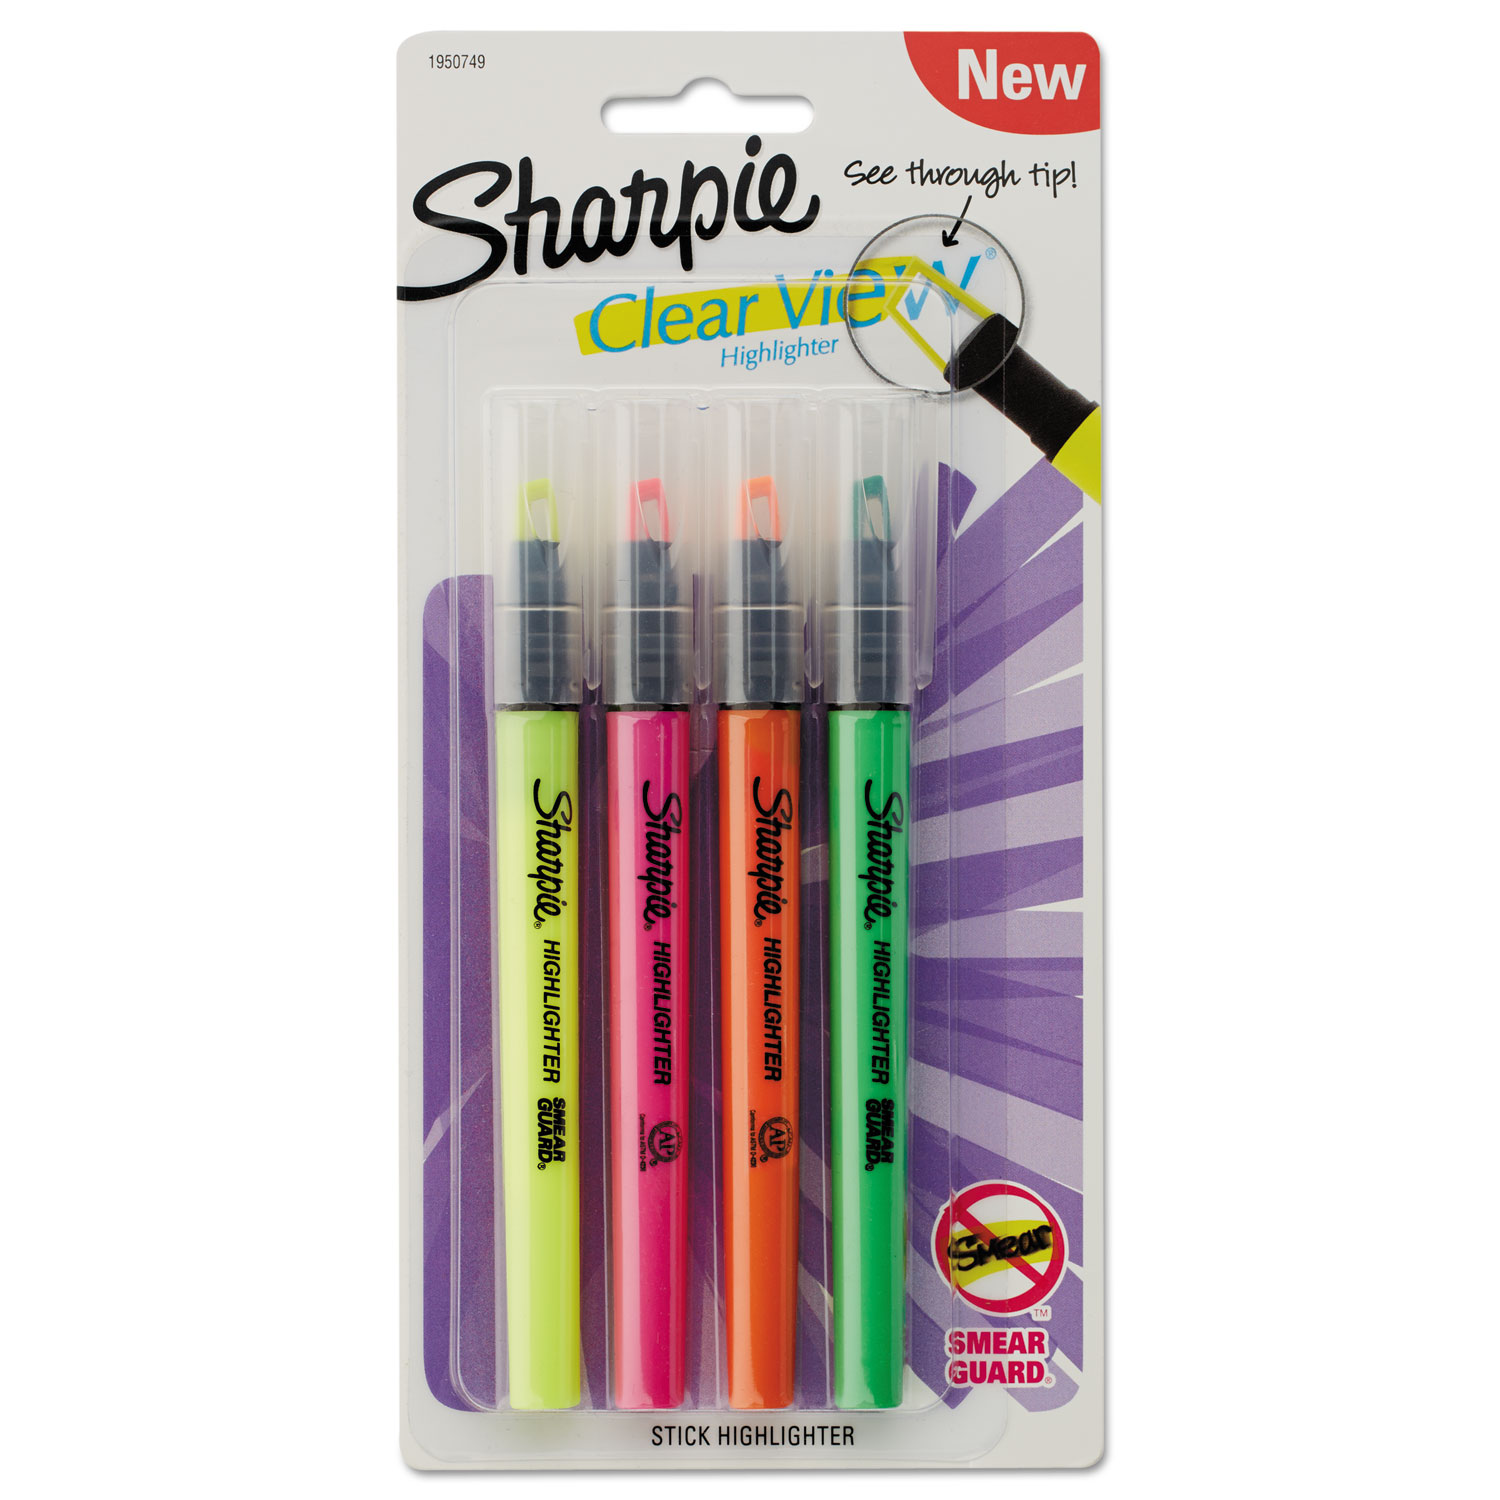  Sharpie 1950749 Clearview Pen-Style Highlighter, Chisel Tip, Assorted Colors, 4/Pack (SAN1950749) 